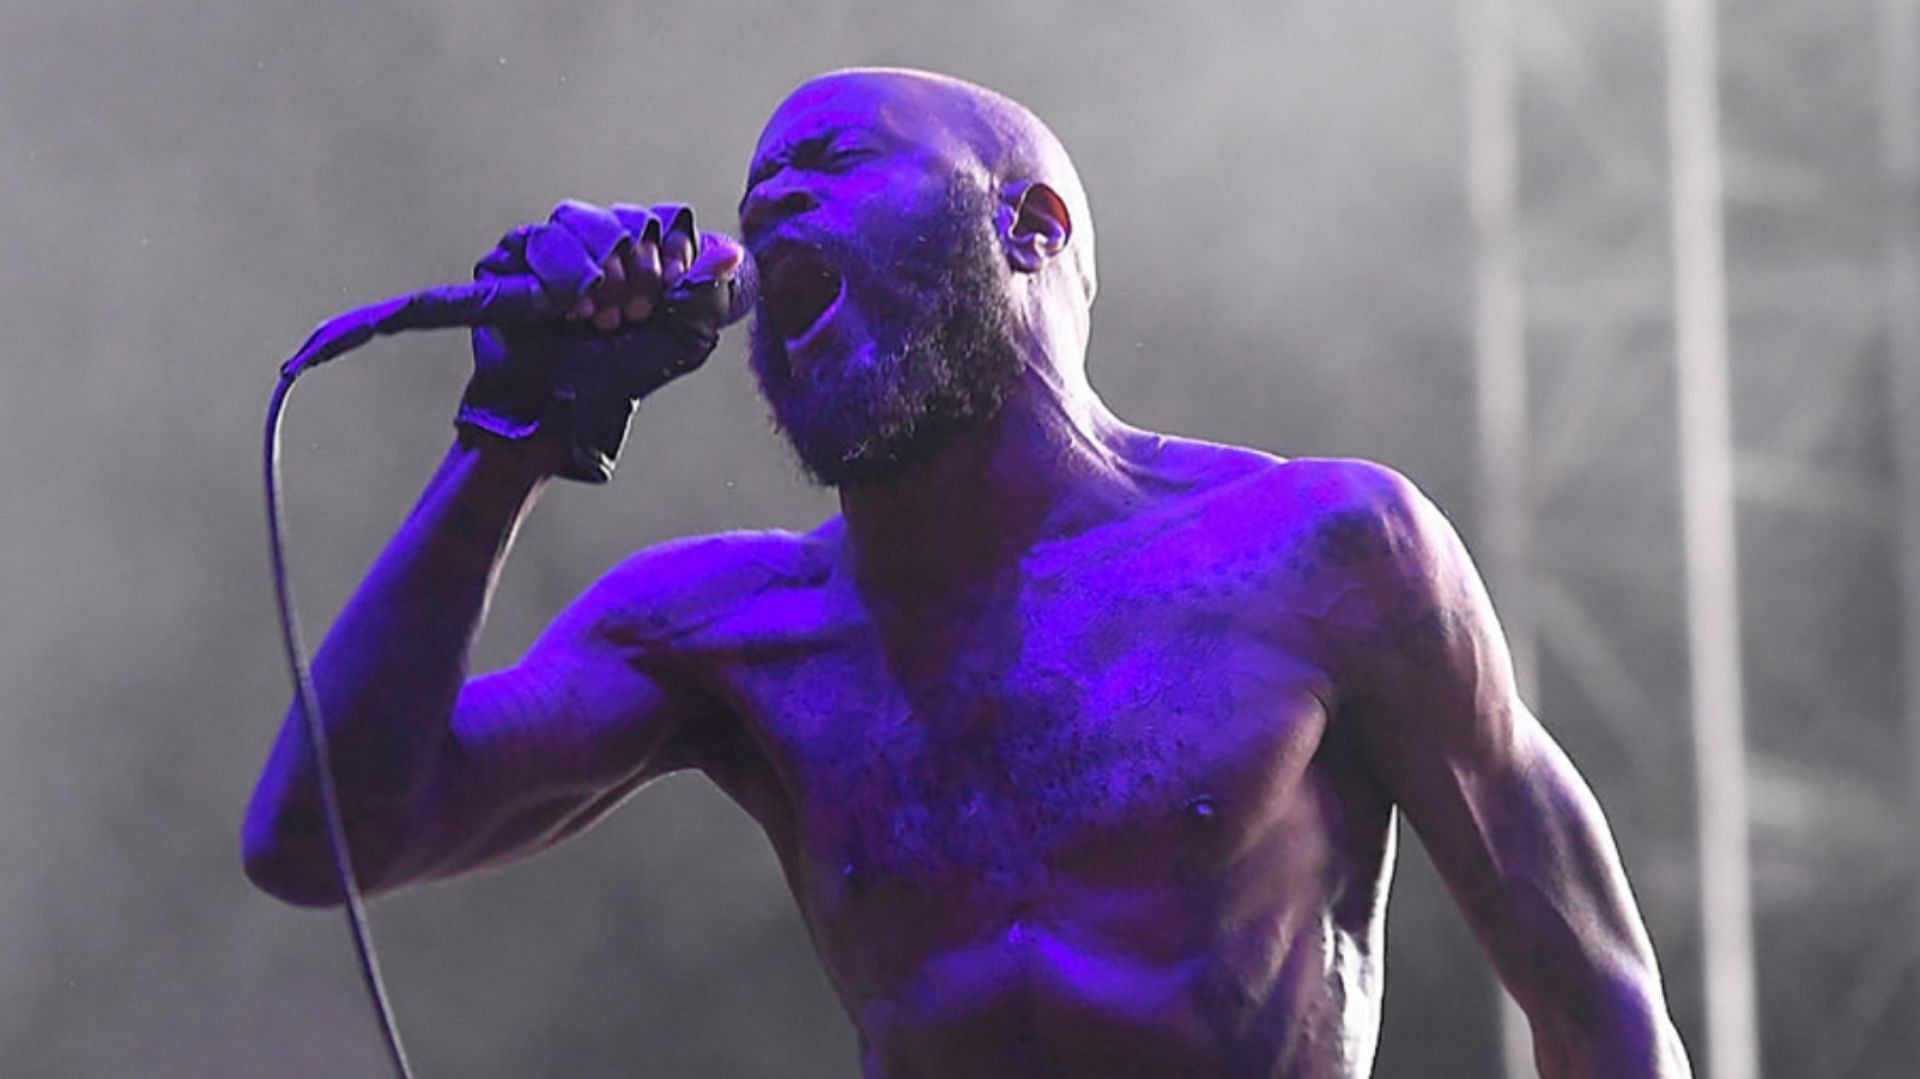 death grips on tour